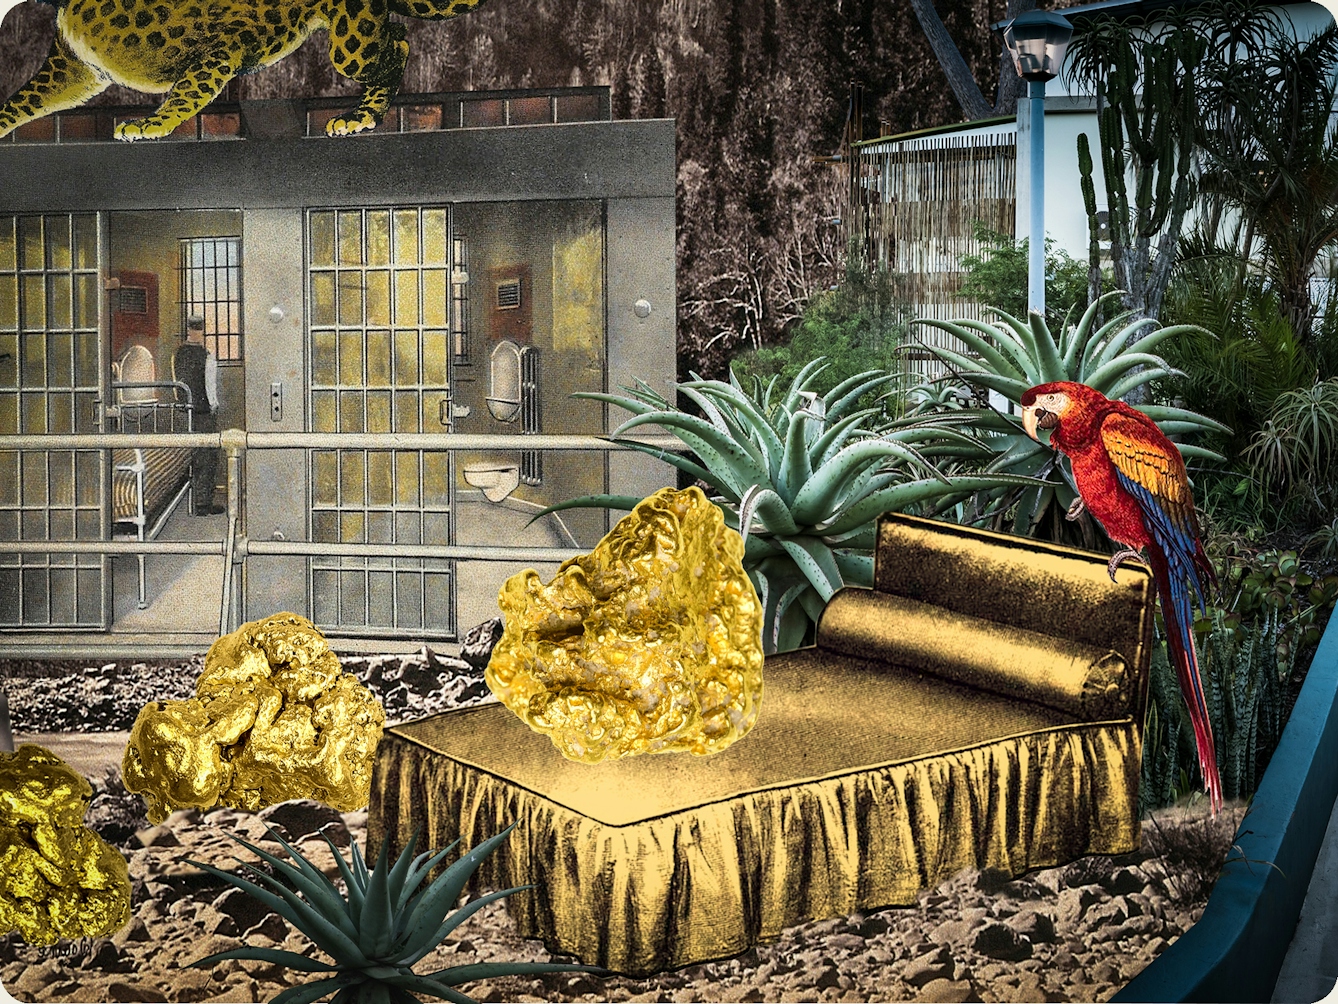 Artwork using collage. The collaged elements are made up of archive material which includes vintage and contemporary photographs, etchings, painted illustrations, lithographic prints and line drawings. This artwork depicts a scene with an urban and rural combined background In the middle distance is a jail-like structure with bars. On top of the jail stands a large leopard. In front of the jail are several large agave plants. To the right is a large gold covered bed with a large gold nugget on top. At the foot of the bed are 2 more golden nuggets. Siting on the headboard is a colourful parrot in red, blue and orange.